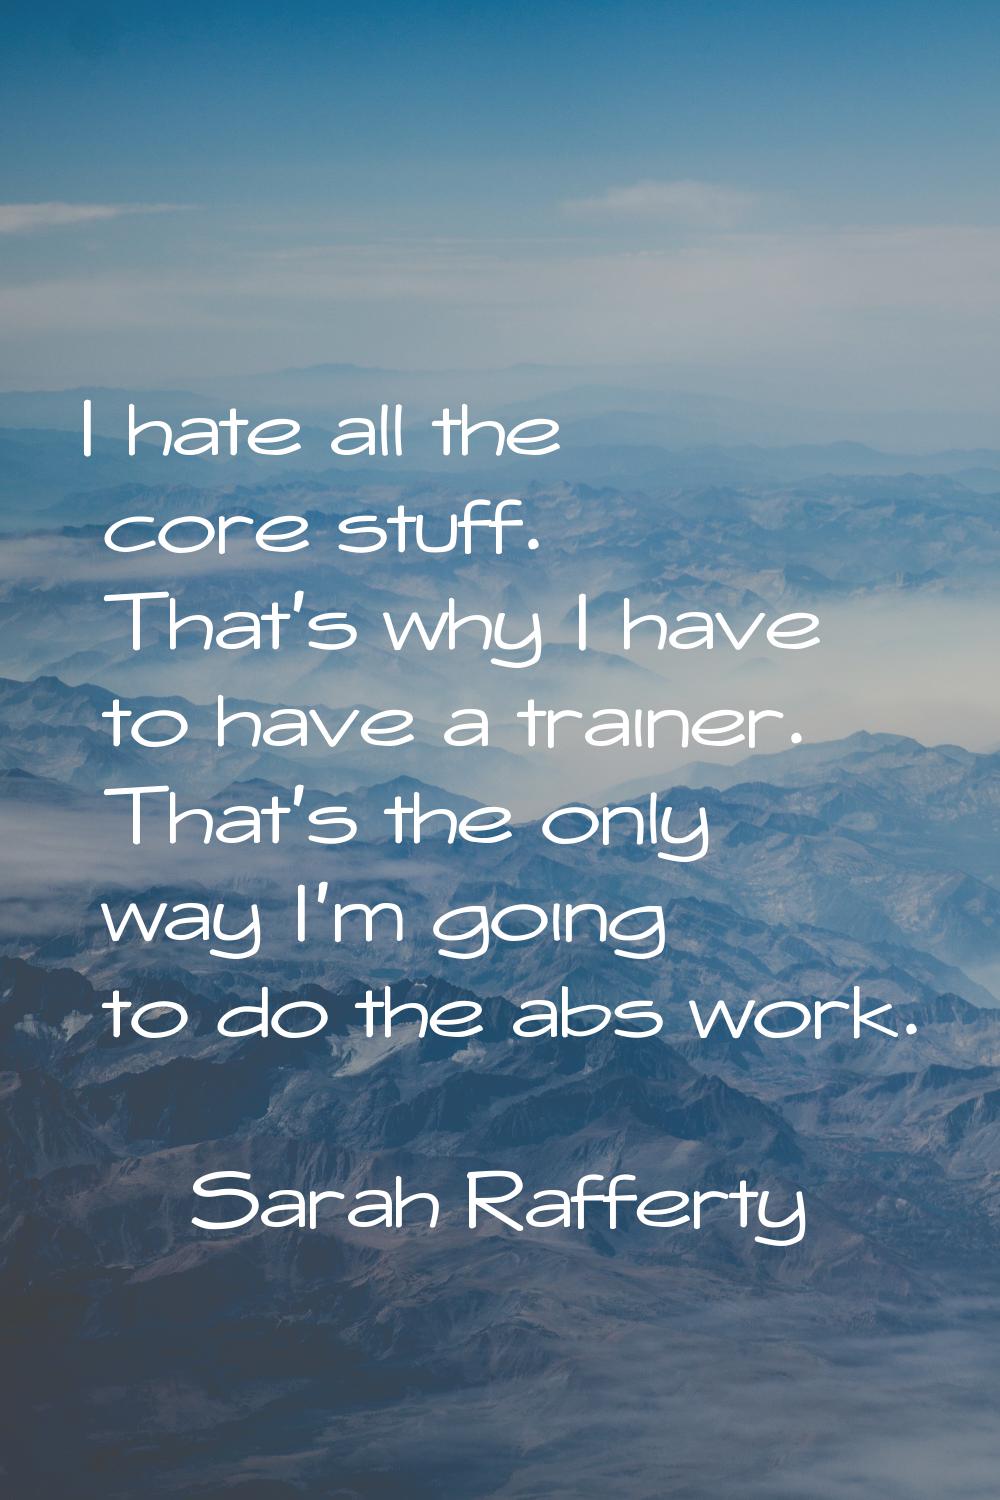 I hate all the core stuff. That's why I have to have a trainer. That's the only way I'm going to do